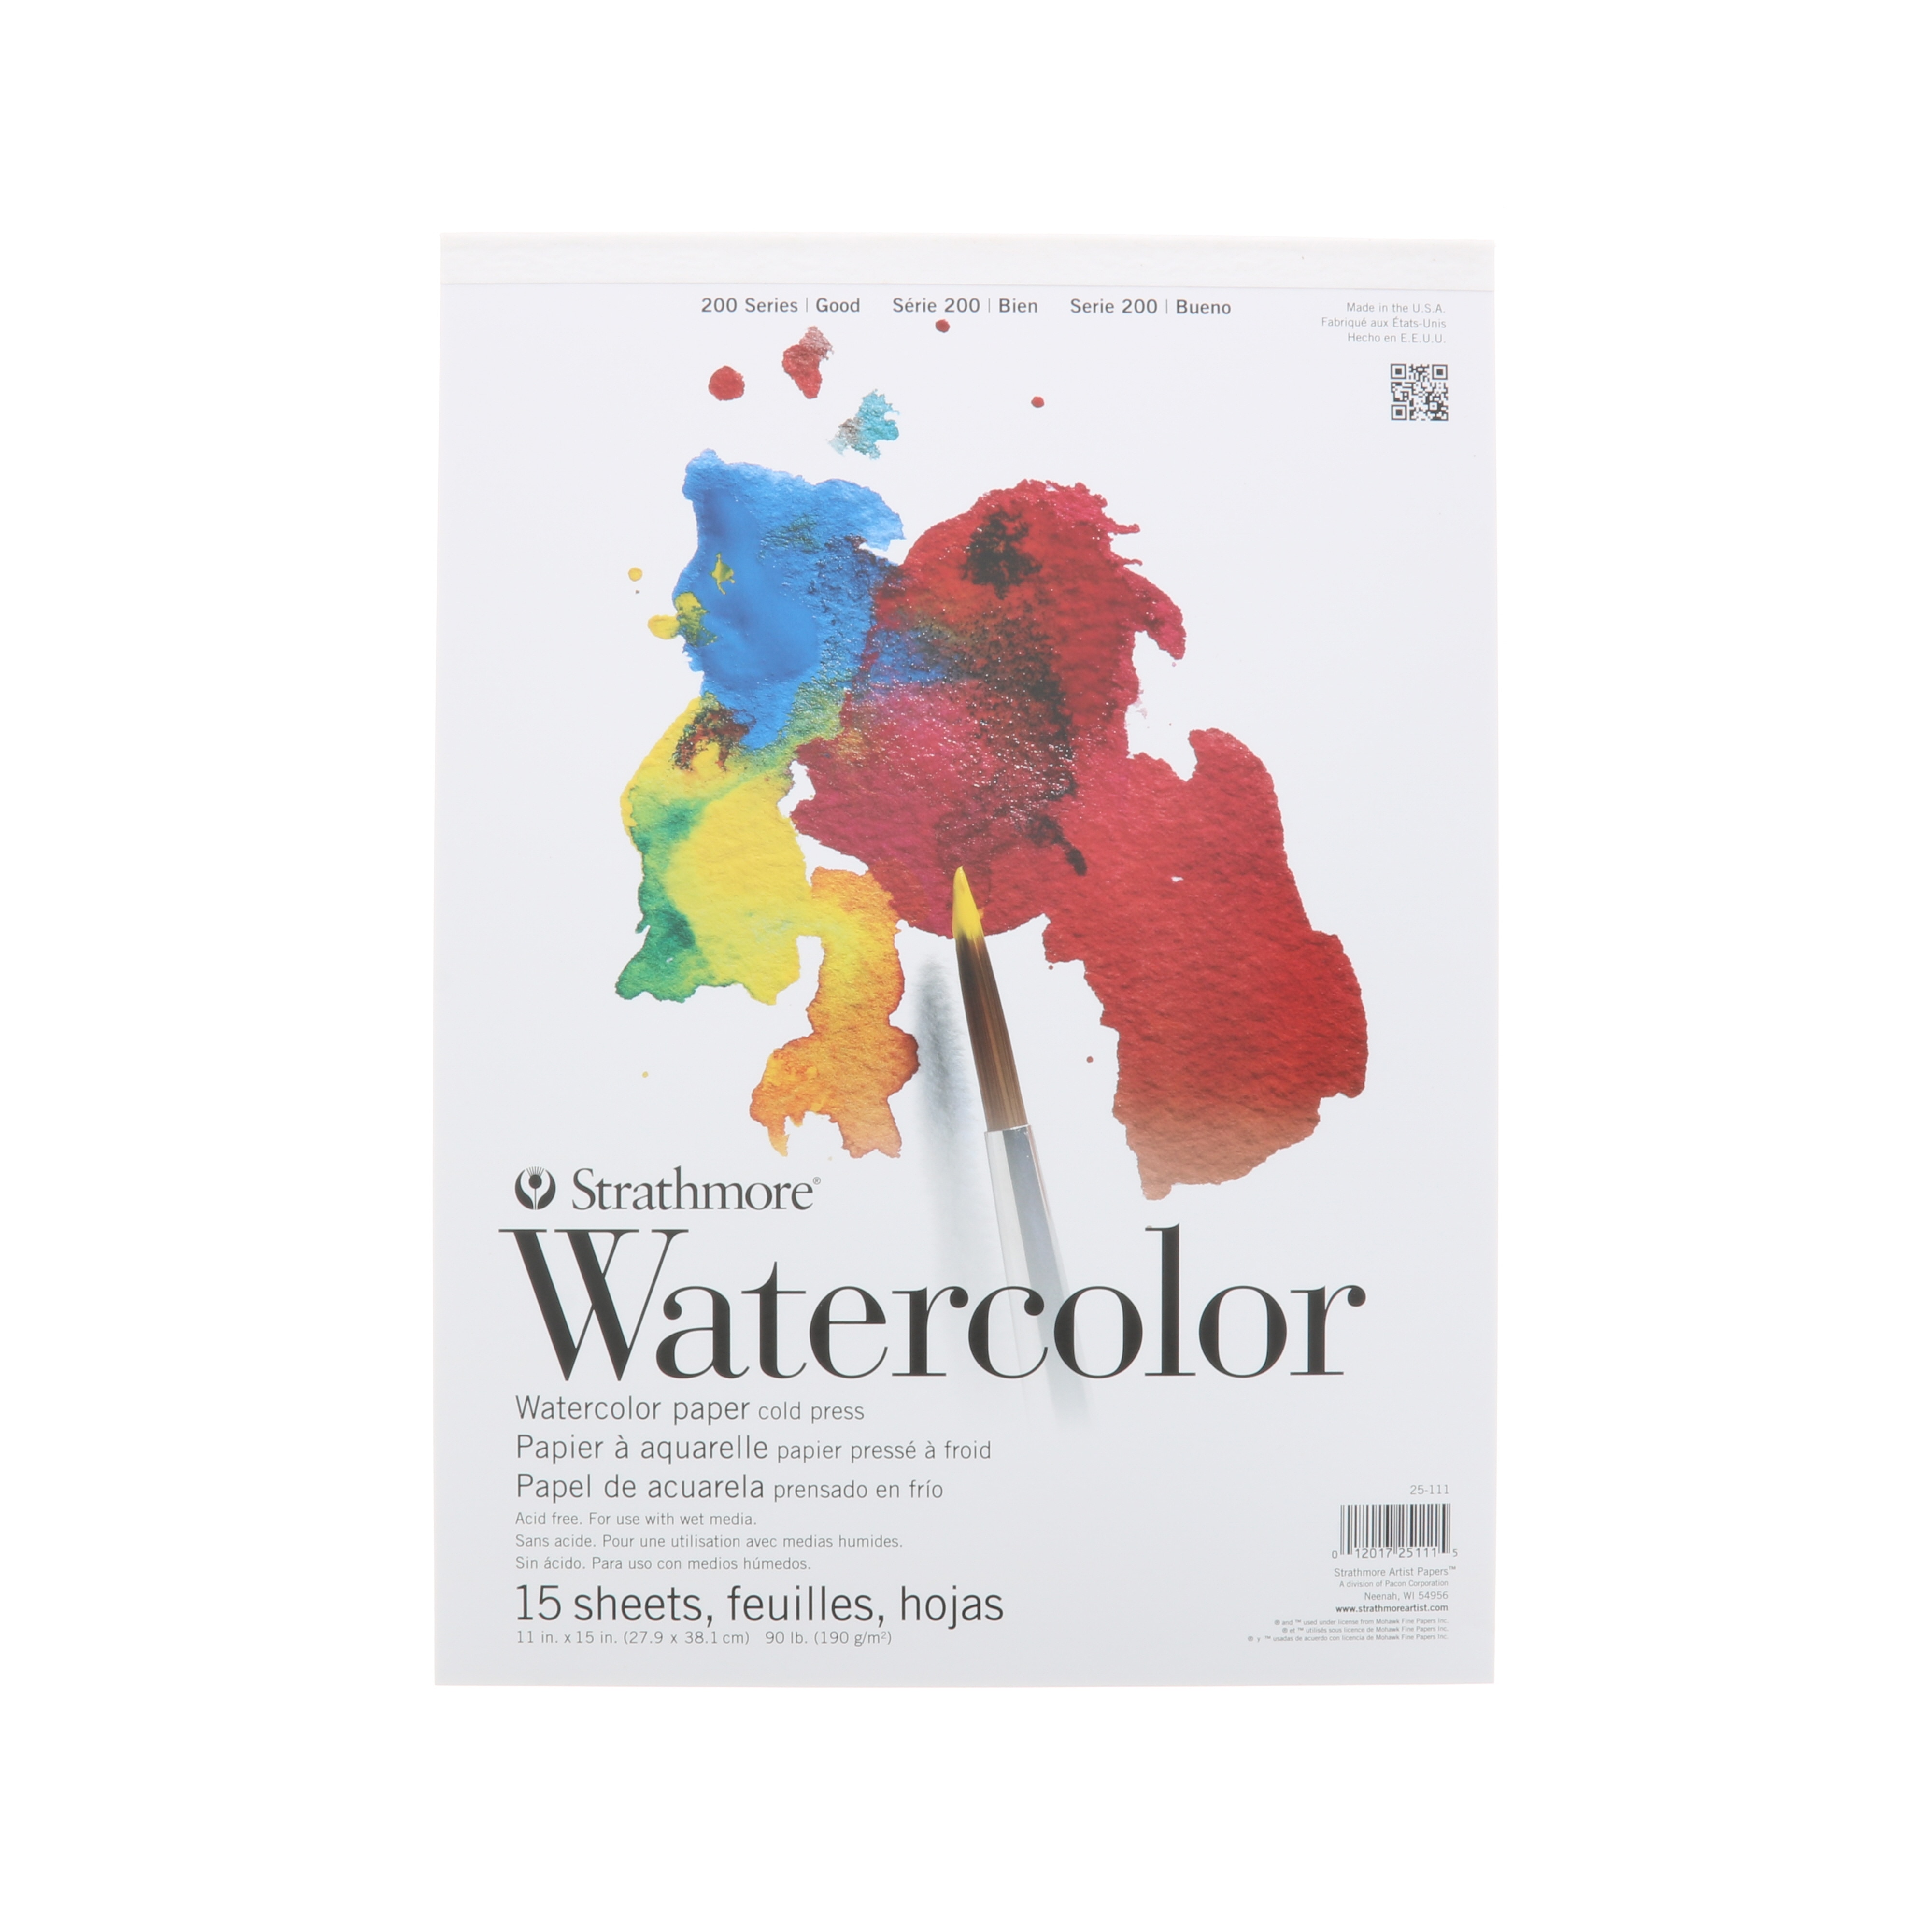 Strathmore Watercolor Paper Pad, 200 Series, 11" x 15", Tape Bound